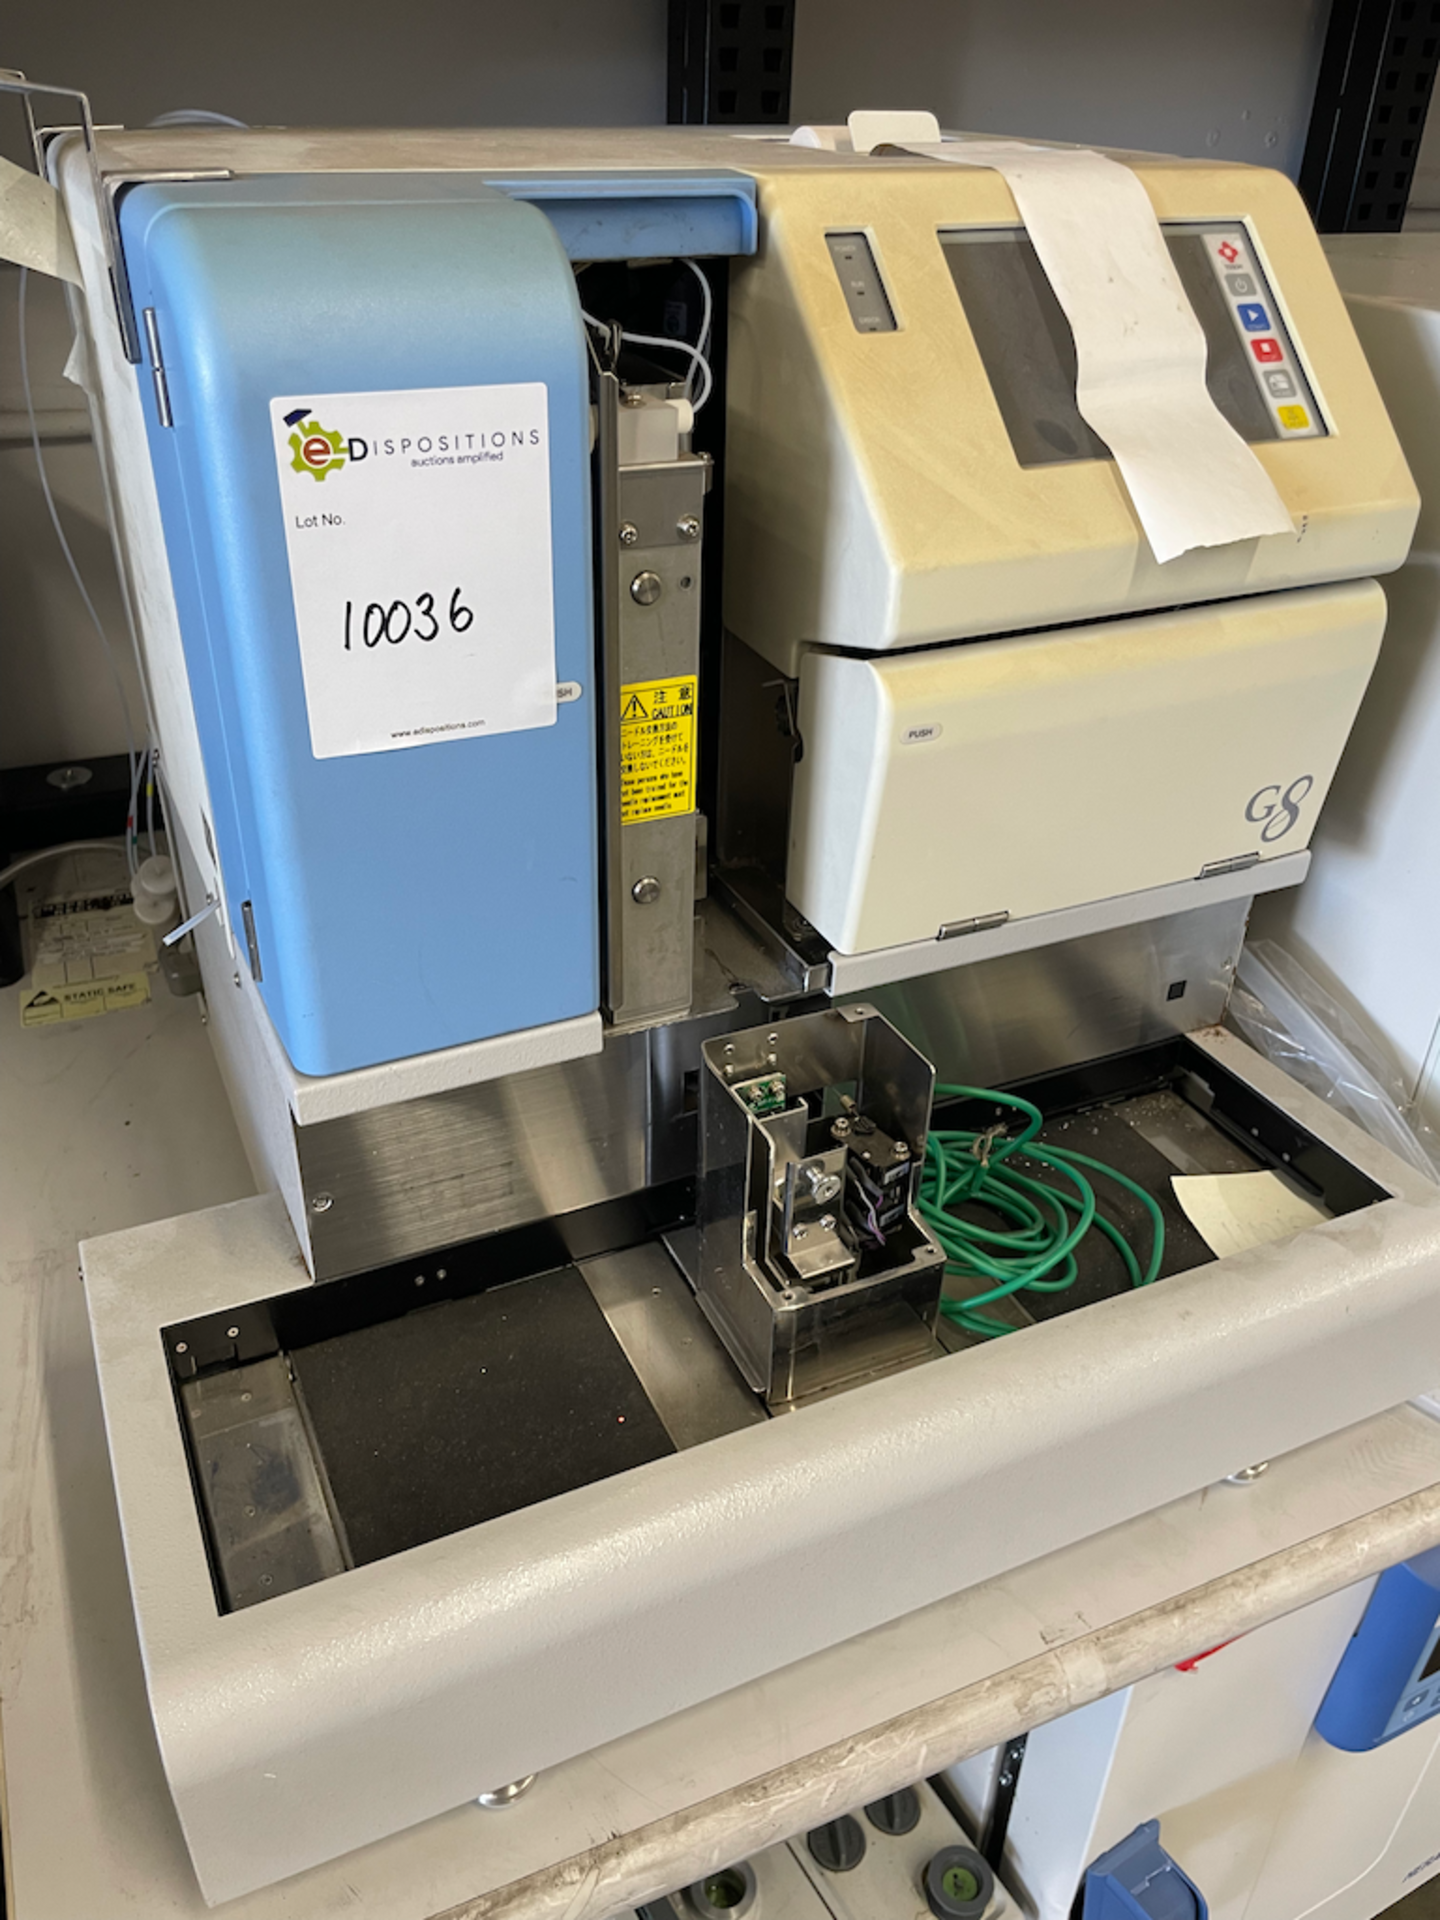 TOSOH G8 HPLC ANALYZER - LOCATED AT 1218 ALDERWOOD AVE. SUNNYVALE, CA 94089 - Image 2 of 3